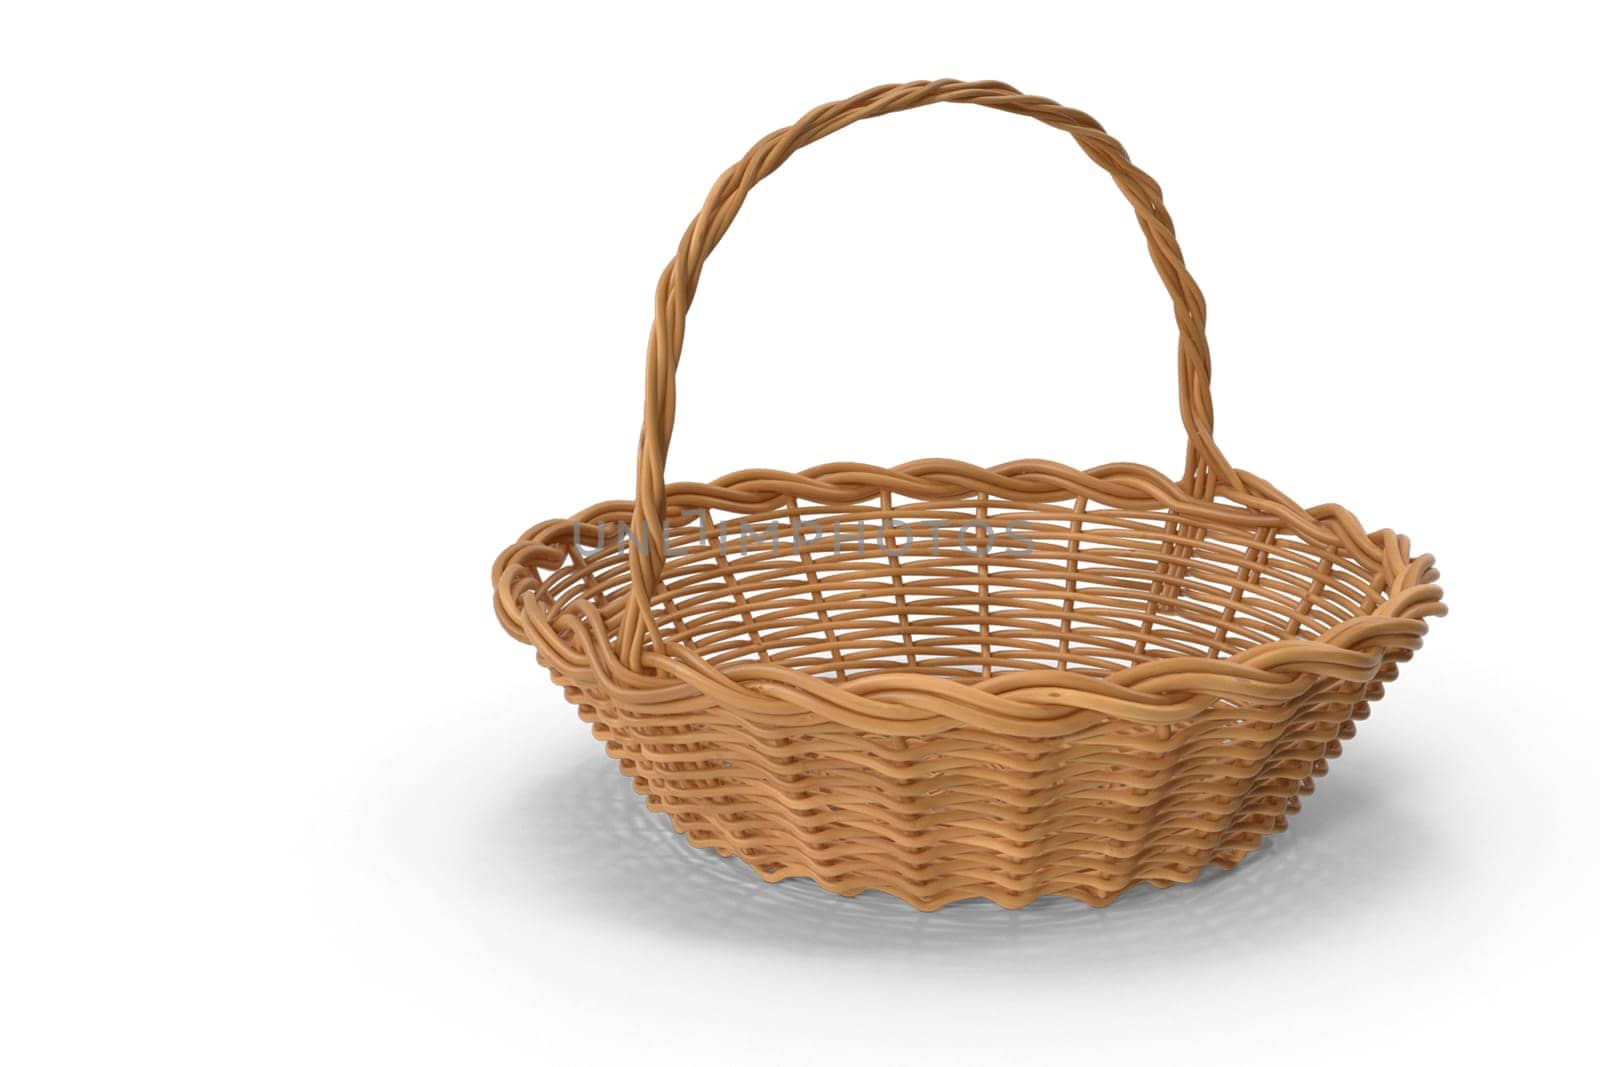 Spacious wicker basket with handle. Presented on a white background.